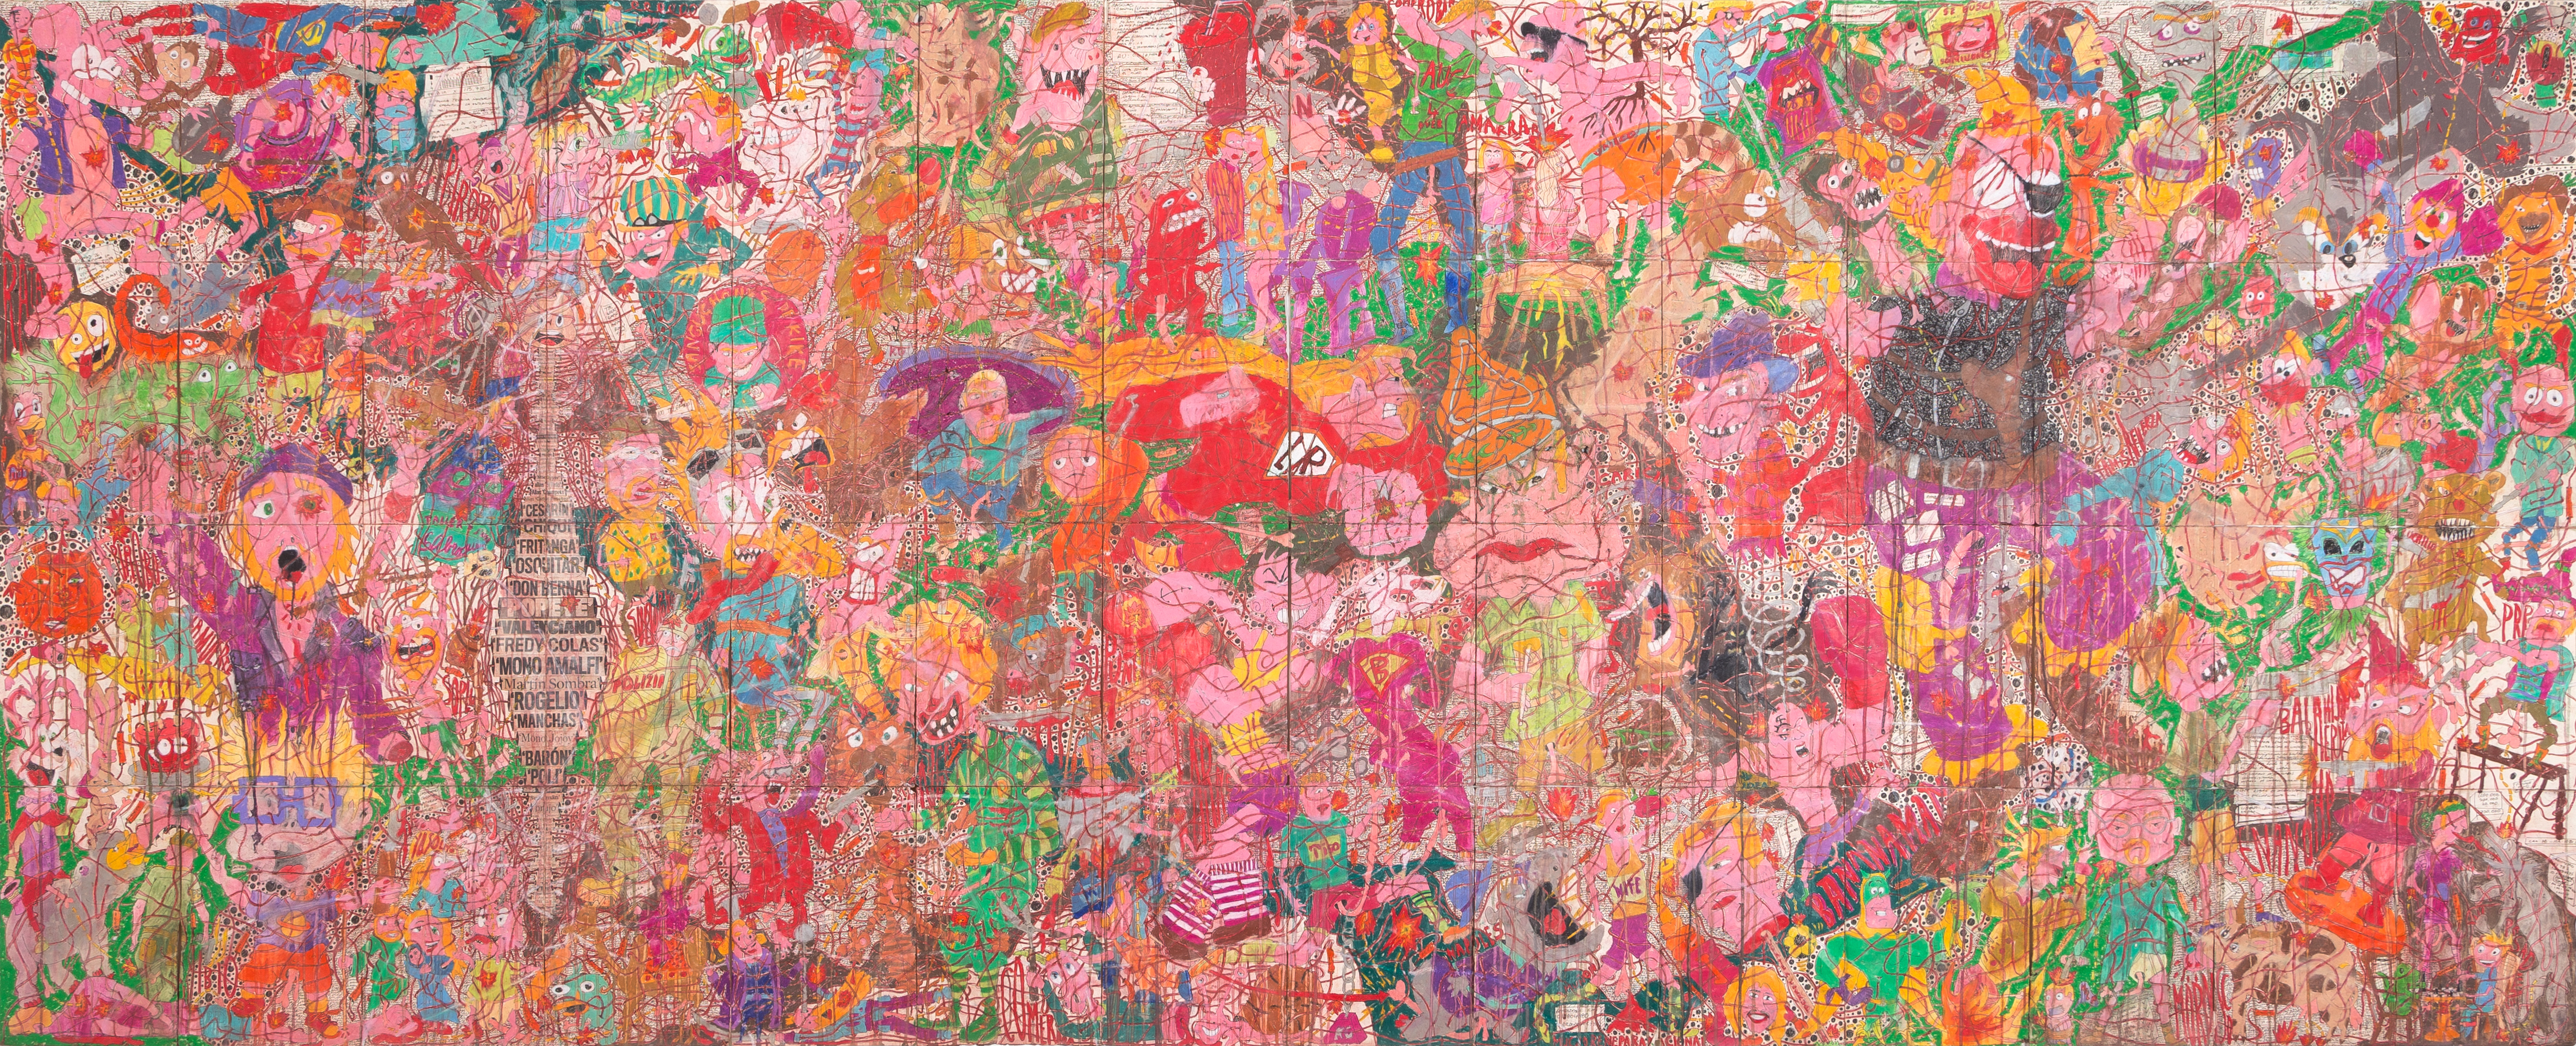 Camilo Restrepo. <em>A Land Reform 17, </em>2019. Ink, water-soluble wax pastel, tape, stickers, newspaper clippings, glue and saliva on paper, 46 3/4 x 115 3/4 inches (118.7 x 294 cm)